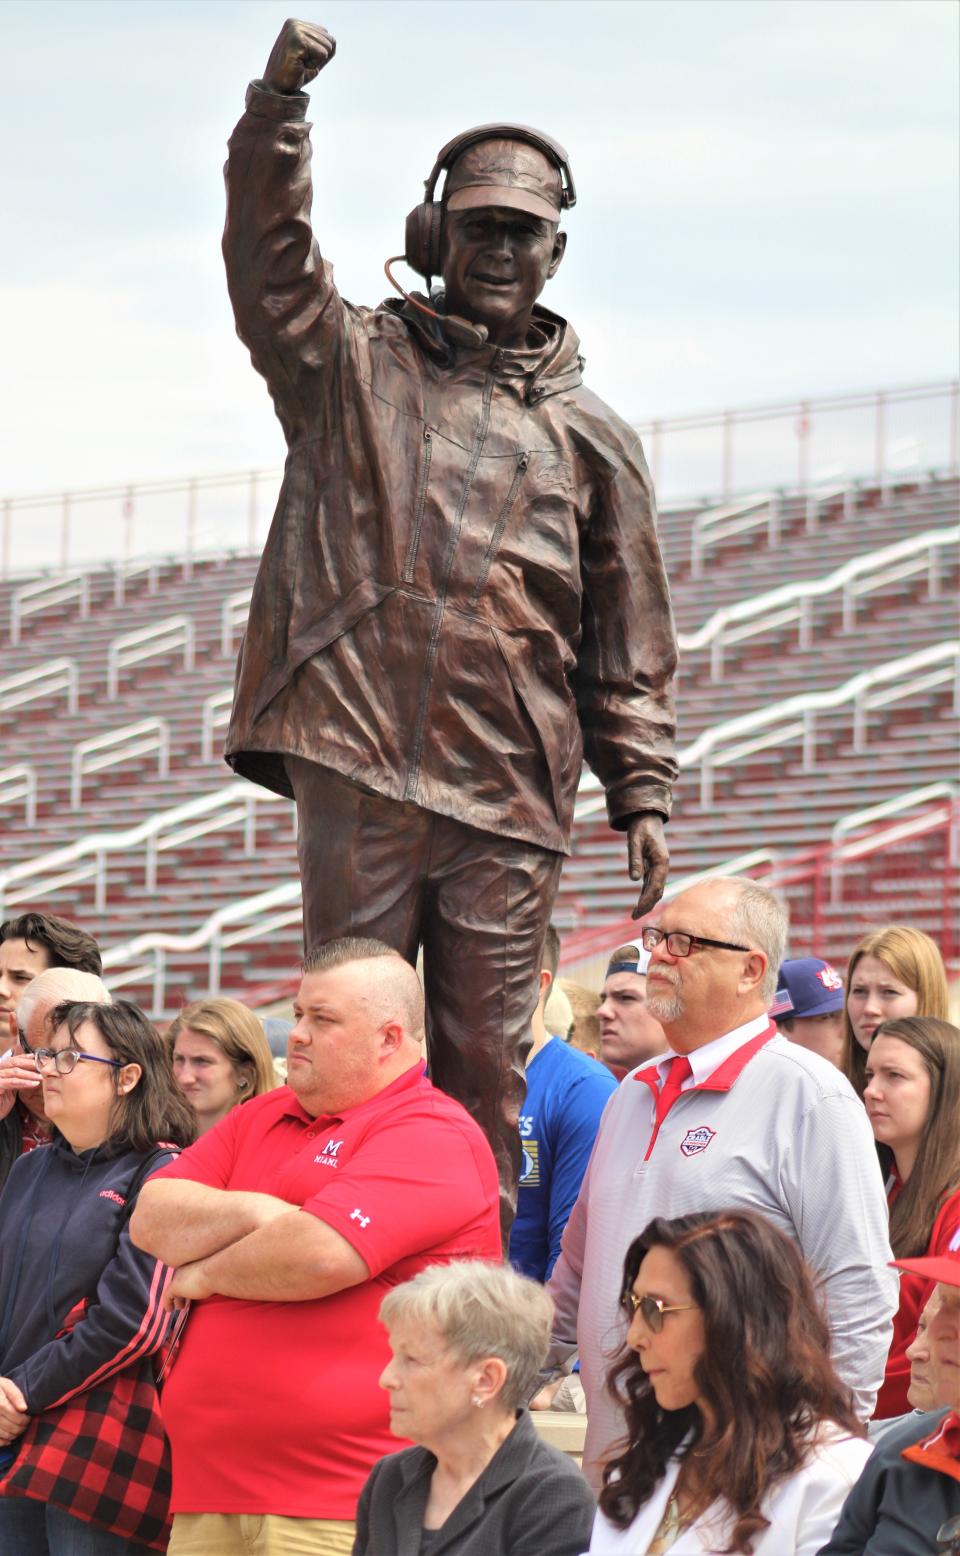 The statue of current Balitmore Ravens head coach John Harbaugh, which was the last statue placed at Yager Stadium in 2014. Los Angeles Rams head football coach Sean McVay became the 10th coach to have a statue in Miami University's prestigious Cradle of Coaches Plaza May 6, 2023. McVay was a former player at Miami and has been coaching in the NFL since 2009.  He became the youngest head coach in NFL history to win a Super Bowl (36) when the Rams beat the Bengals in 2022.